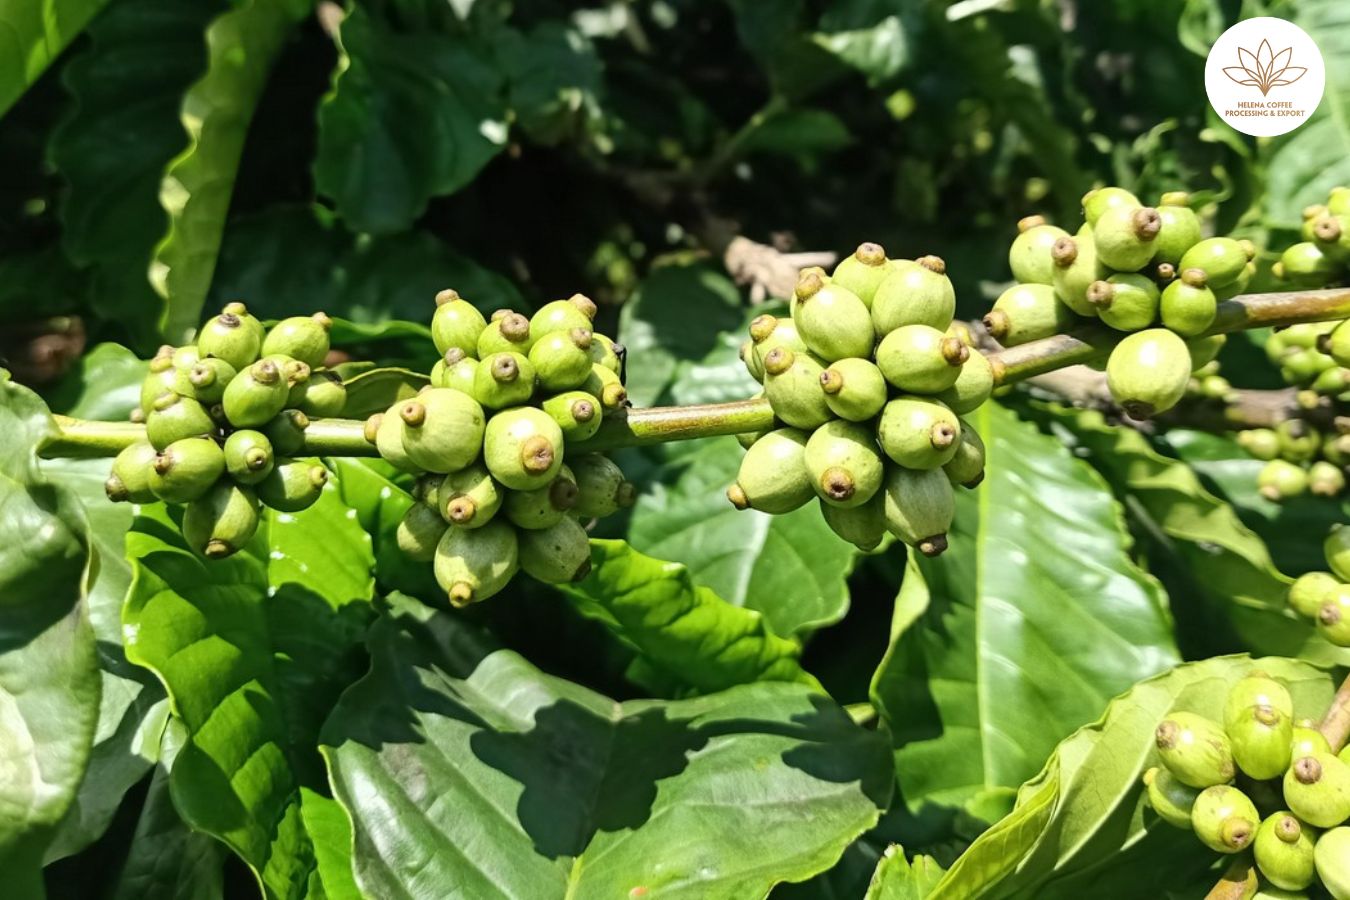 Overview of Coffee Plant Care and Growing Techniques